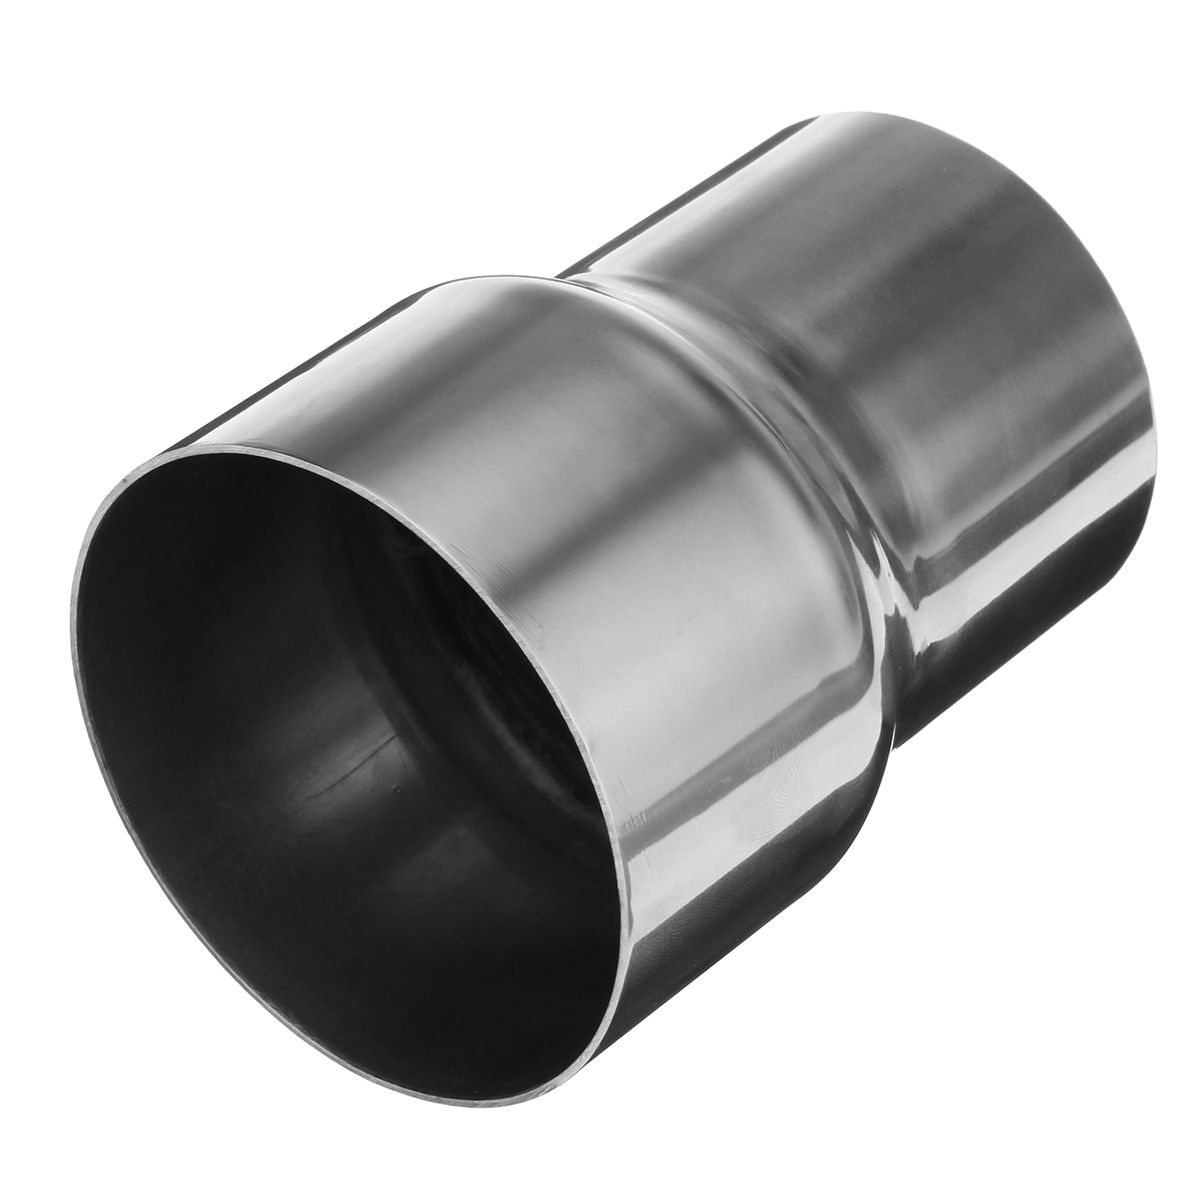 3-Inch-To-25-Inch-OD-Stainless-Standard-Exhaust-Pipe-Connector-Adapter-Reducer-Tube-1229159